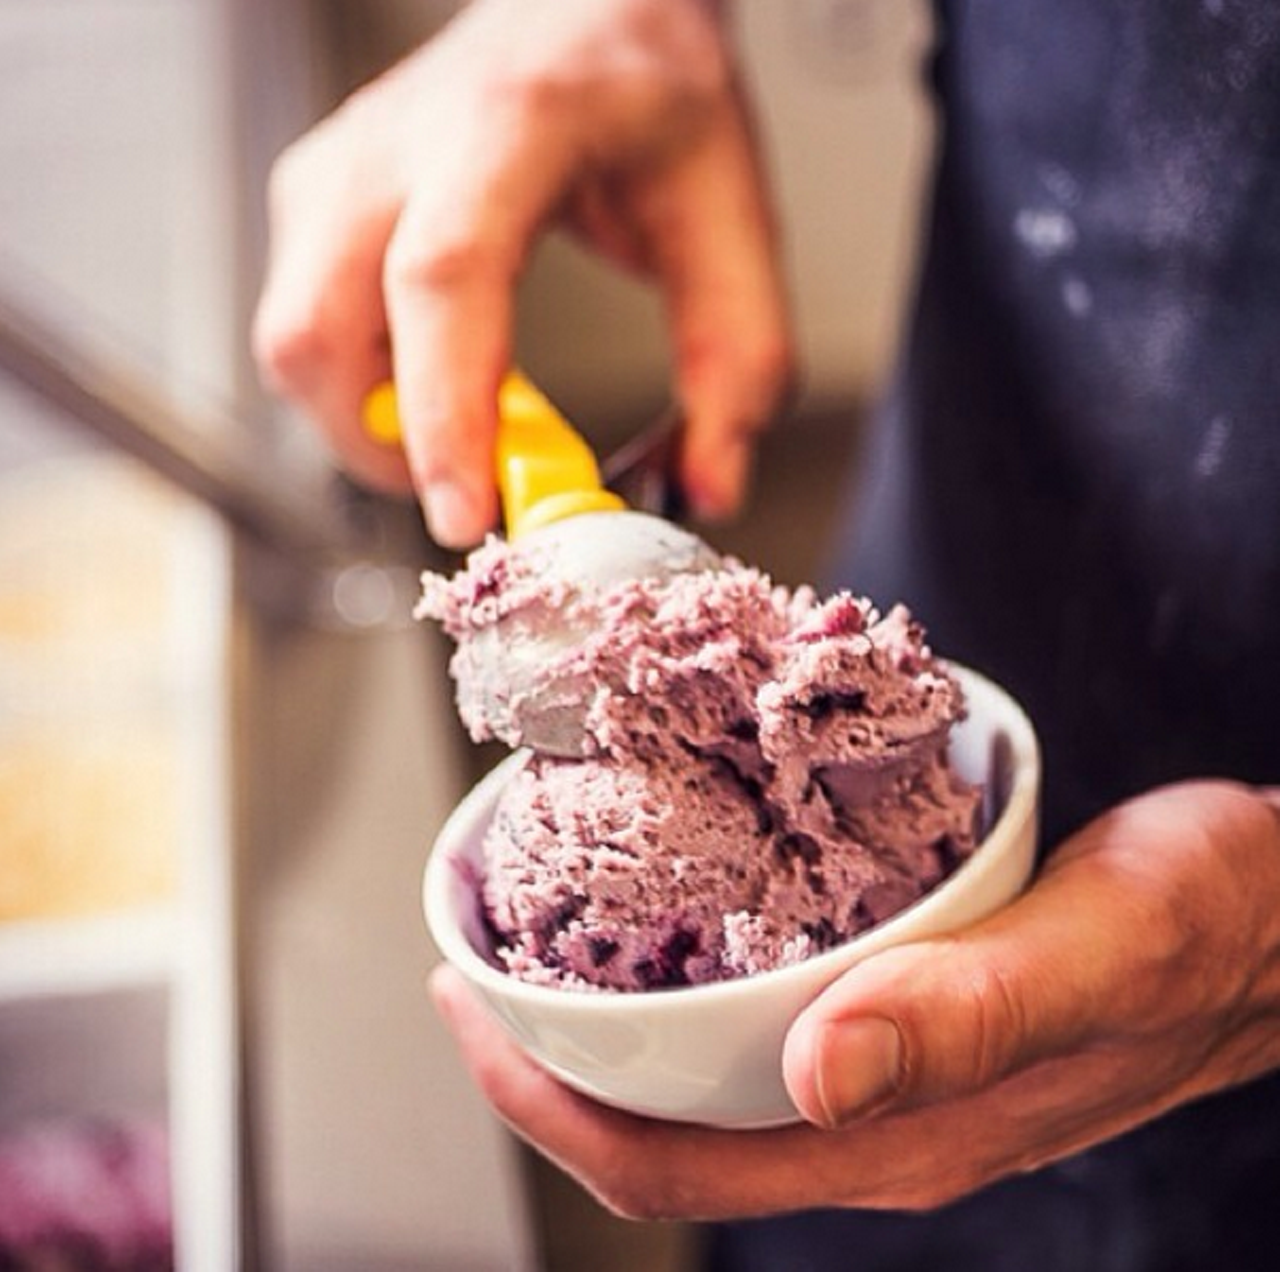 The patron saint of Cleveland ice cream also happens to make some of the best vegan ice cream around. They typically have a couple vegan flavors on hand so you can enjoy a scoop with your non-vegan friends.